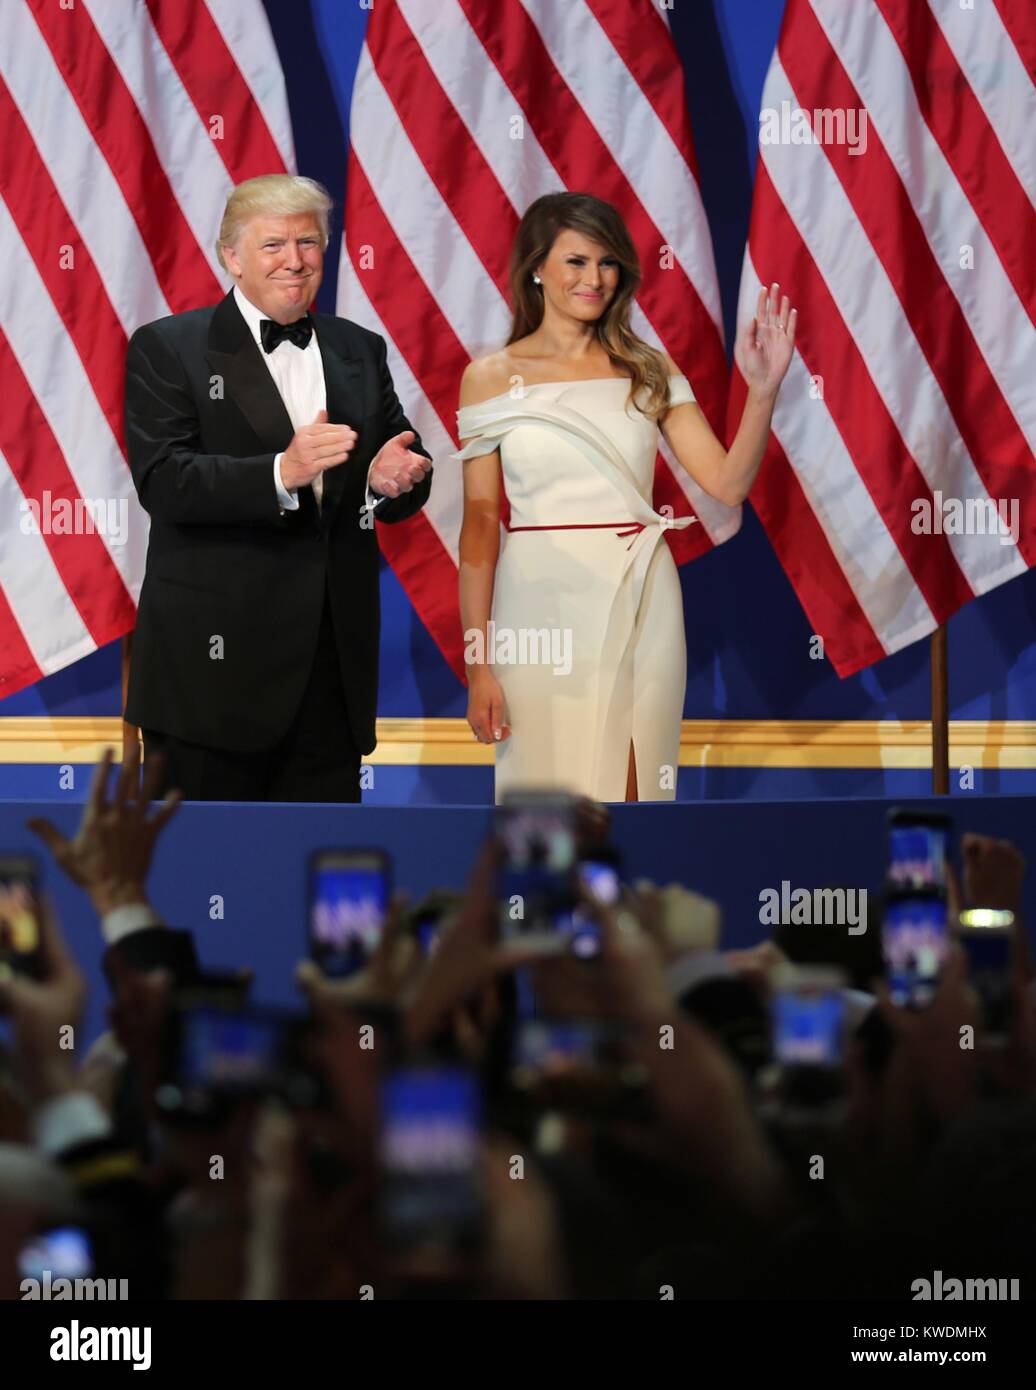 President Donald Trump and First Lady Melania at the SALUTE TO OUR ARMED FORCES BALL. One of three official inaugural balls, it paid tribute to members the armed forces, first responders, and emergency personnel. Jan. 20, 2017, Washington, DC (BSLOC 2017 19 3) Stock Photo